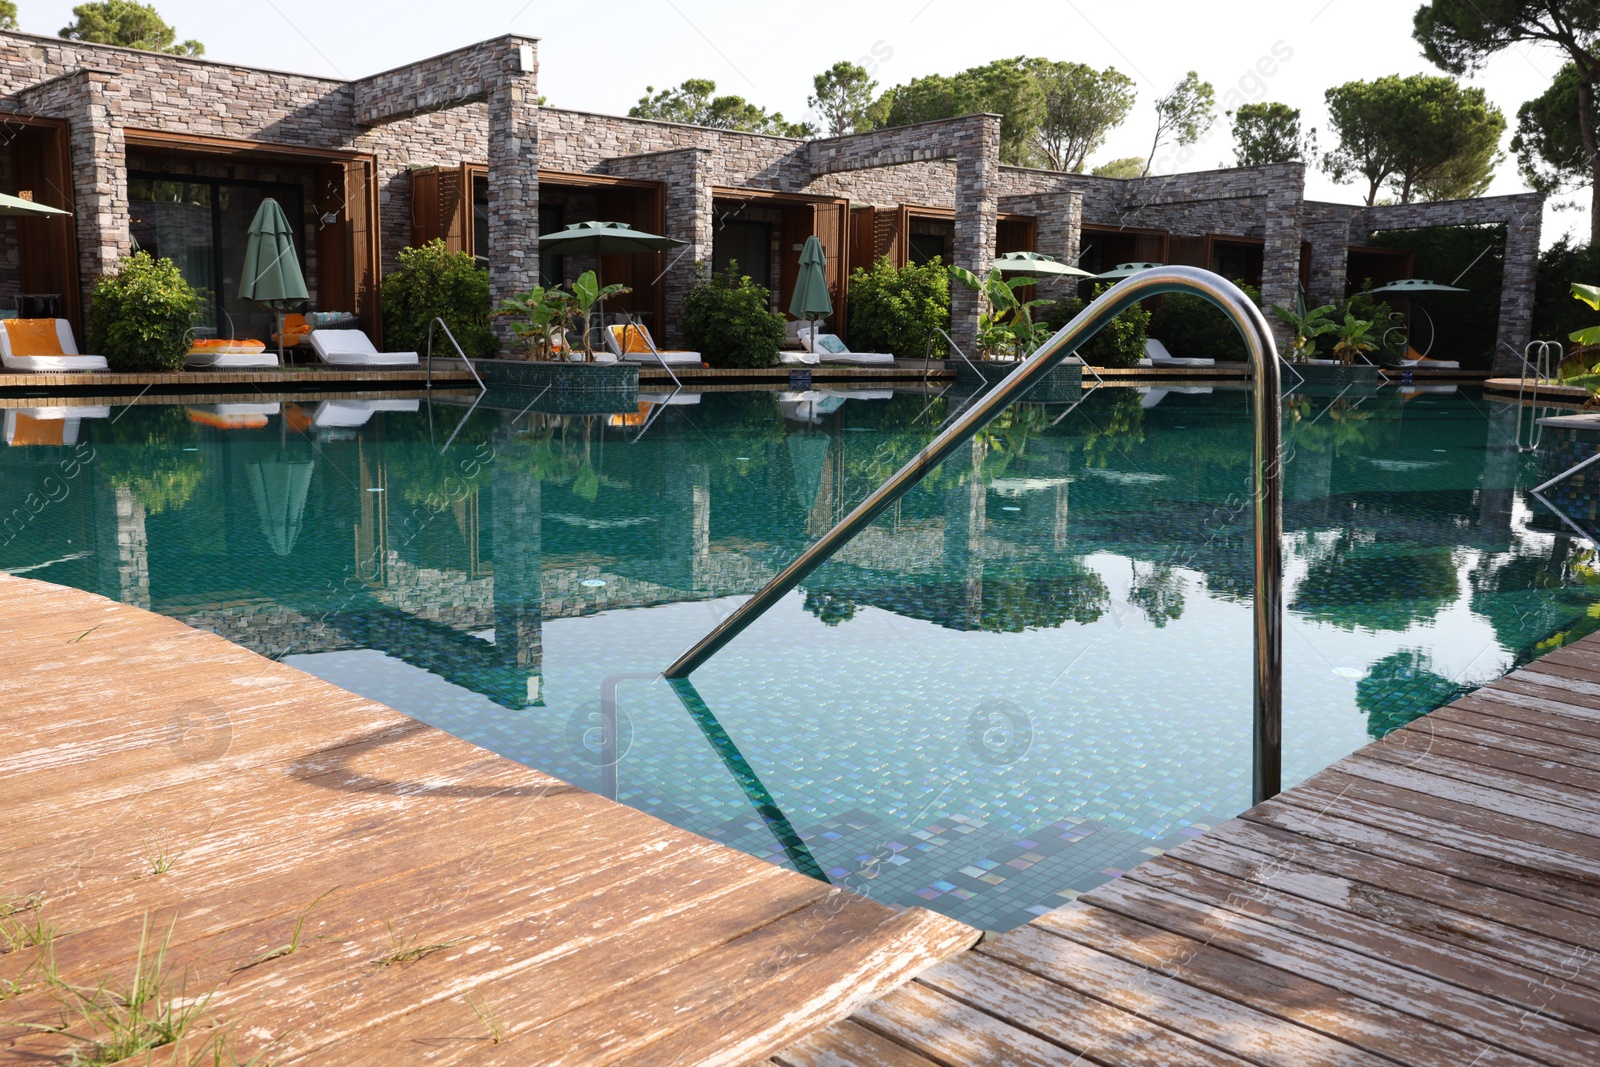 Photo of Wooden deck, swimming pool and metal rail at luxury resort